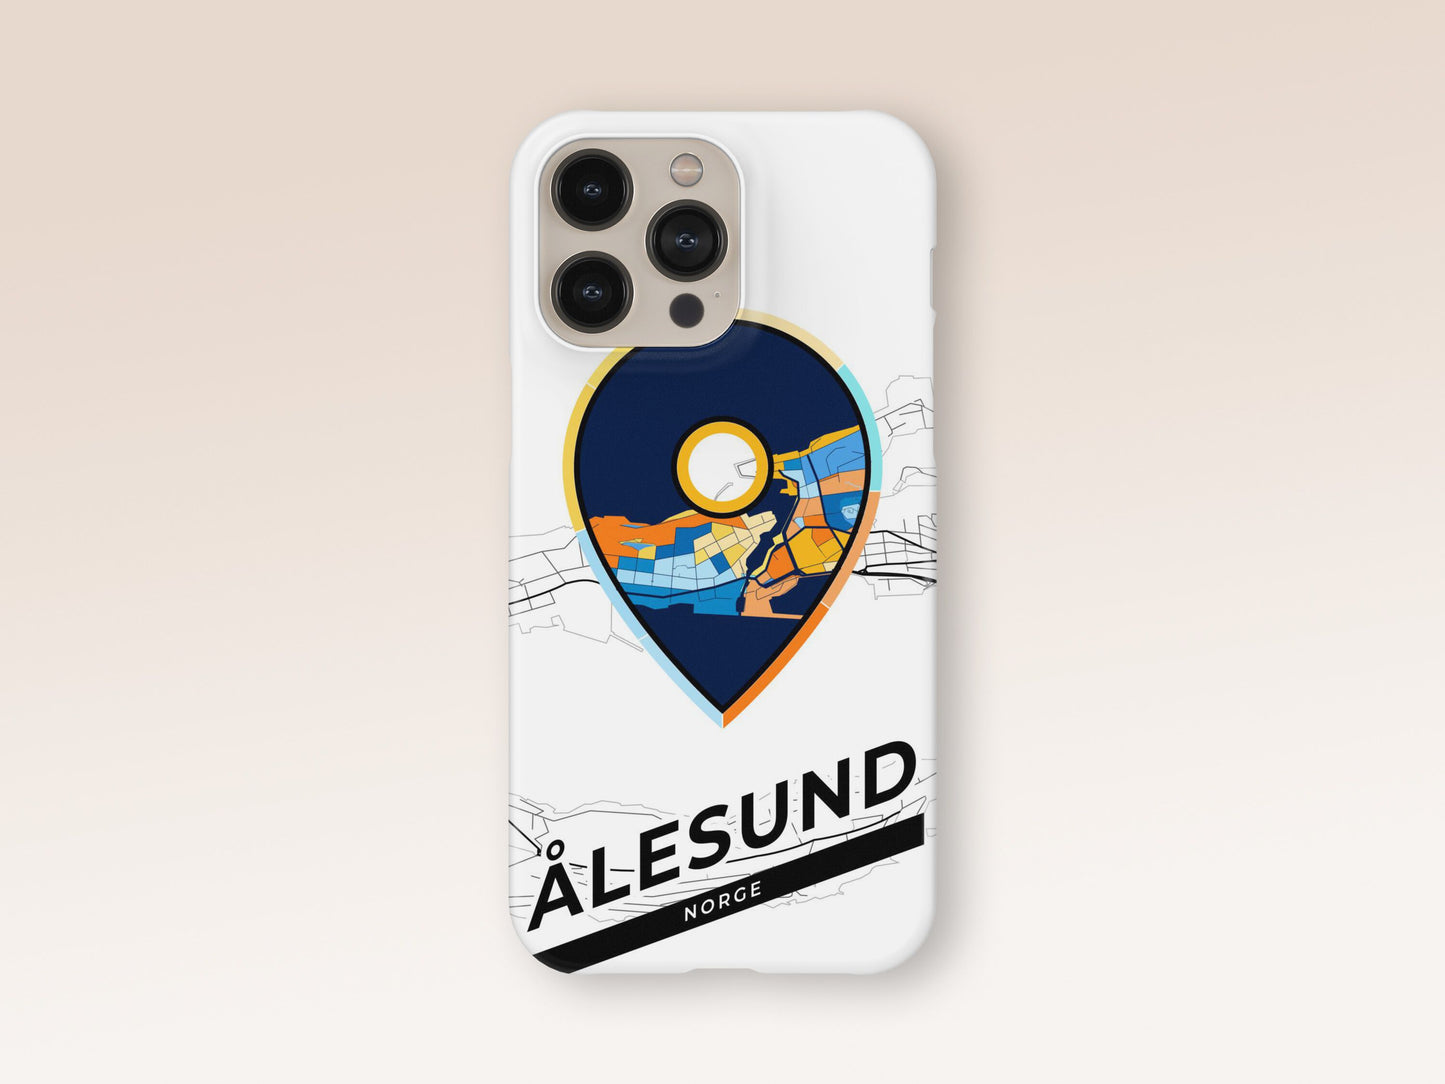 Ålesund Norway slim phone case with colorful icon. Birthday, wedding or housewarming gift. Couple match cases. 1